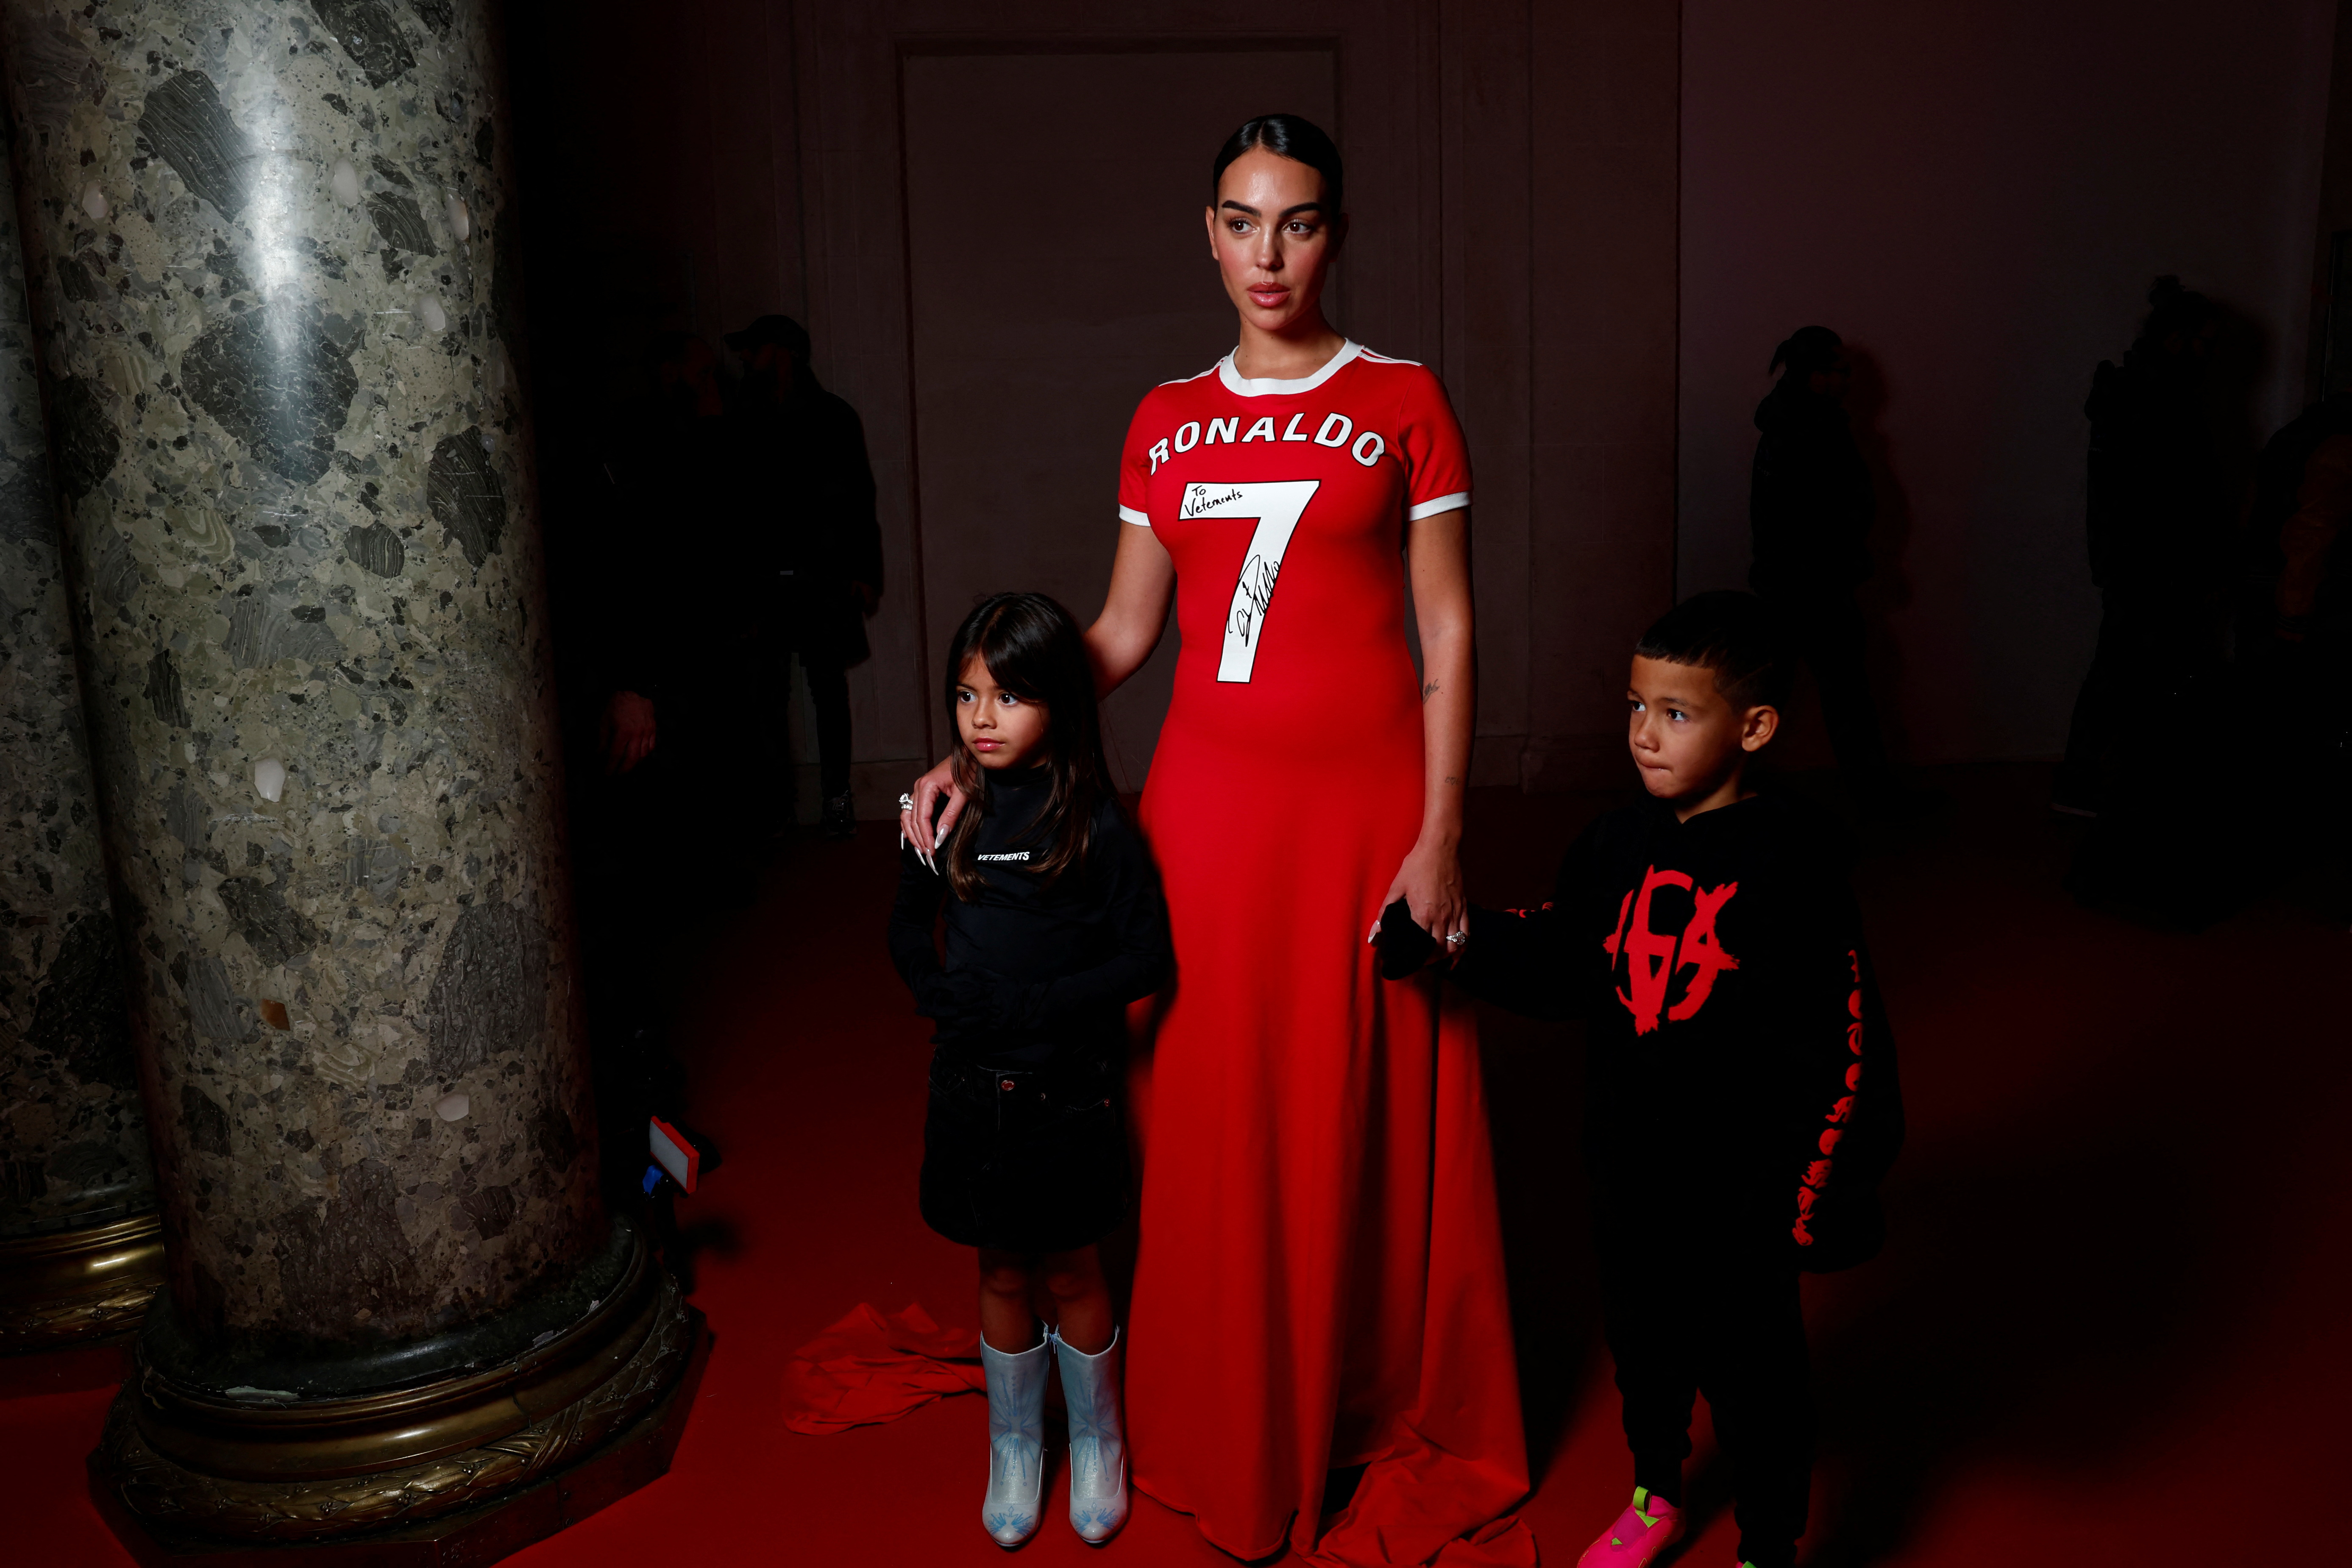 The model posed with her twin kids Eva and Mateo Ronaldo